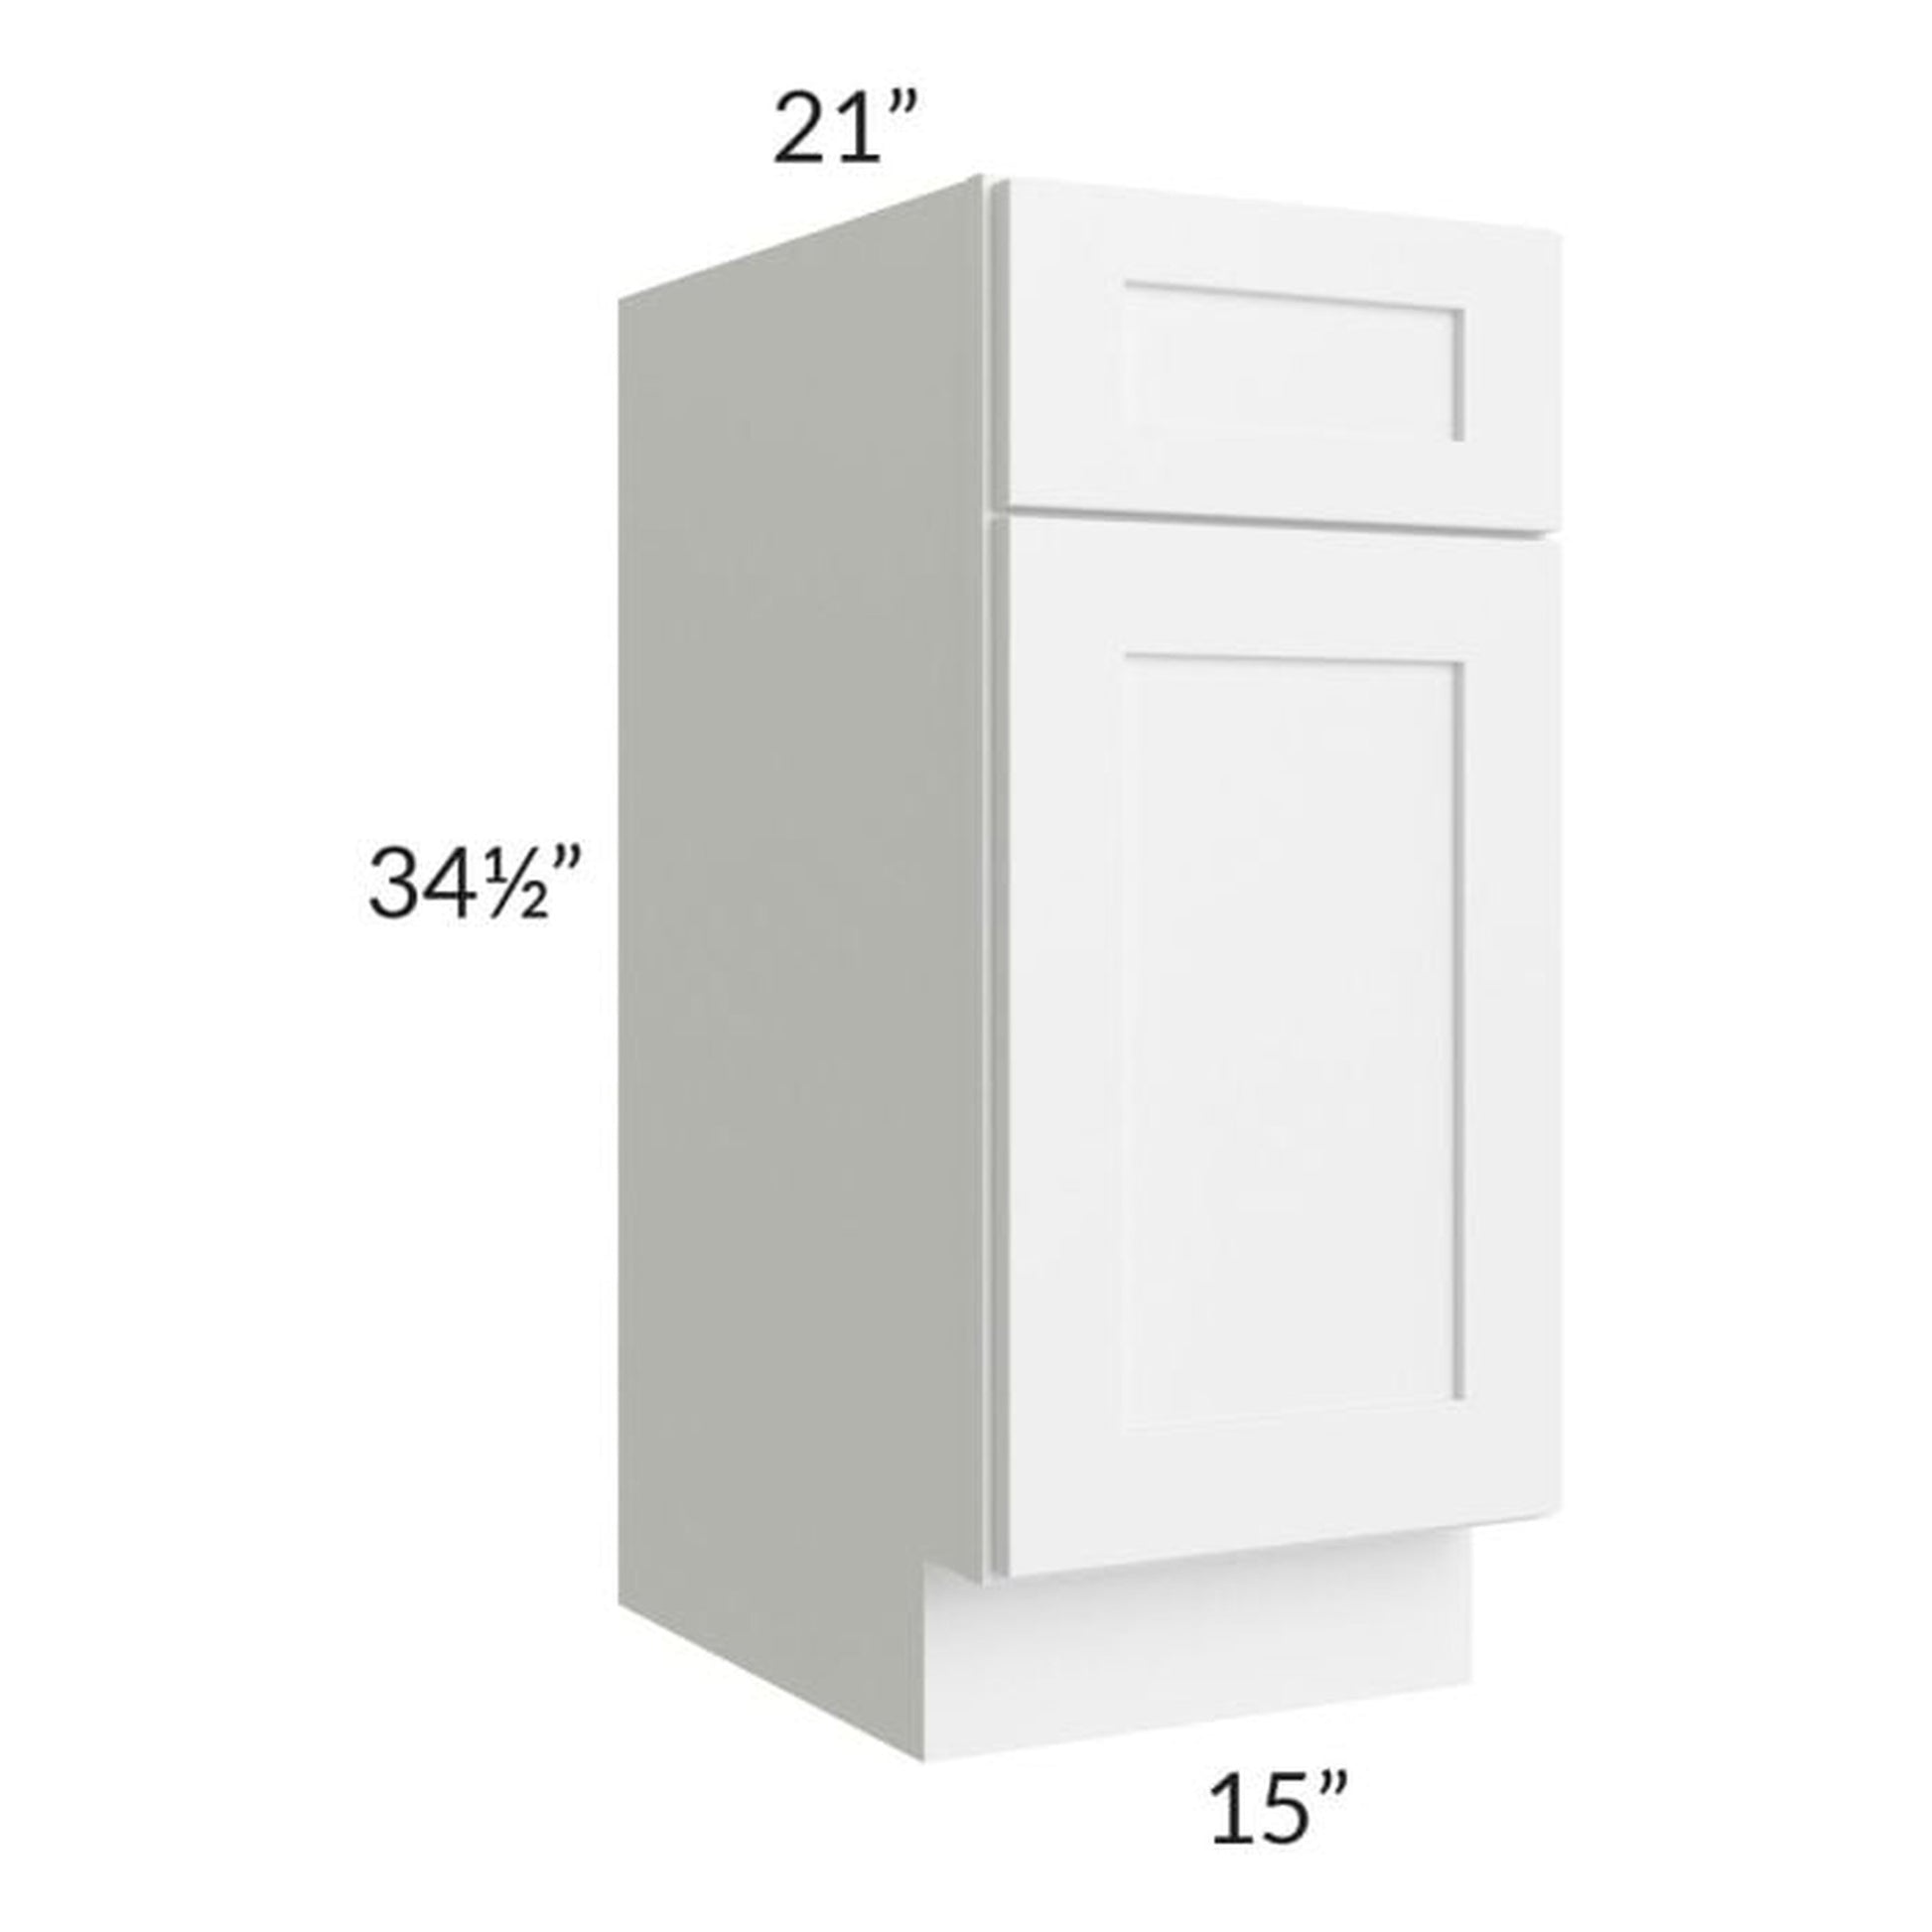 RTA Frosted White Shaker 15" Vanity Base Cabinet with 1 Decorative End Panel